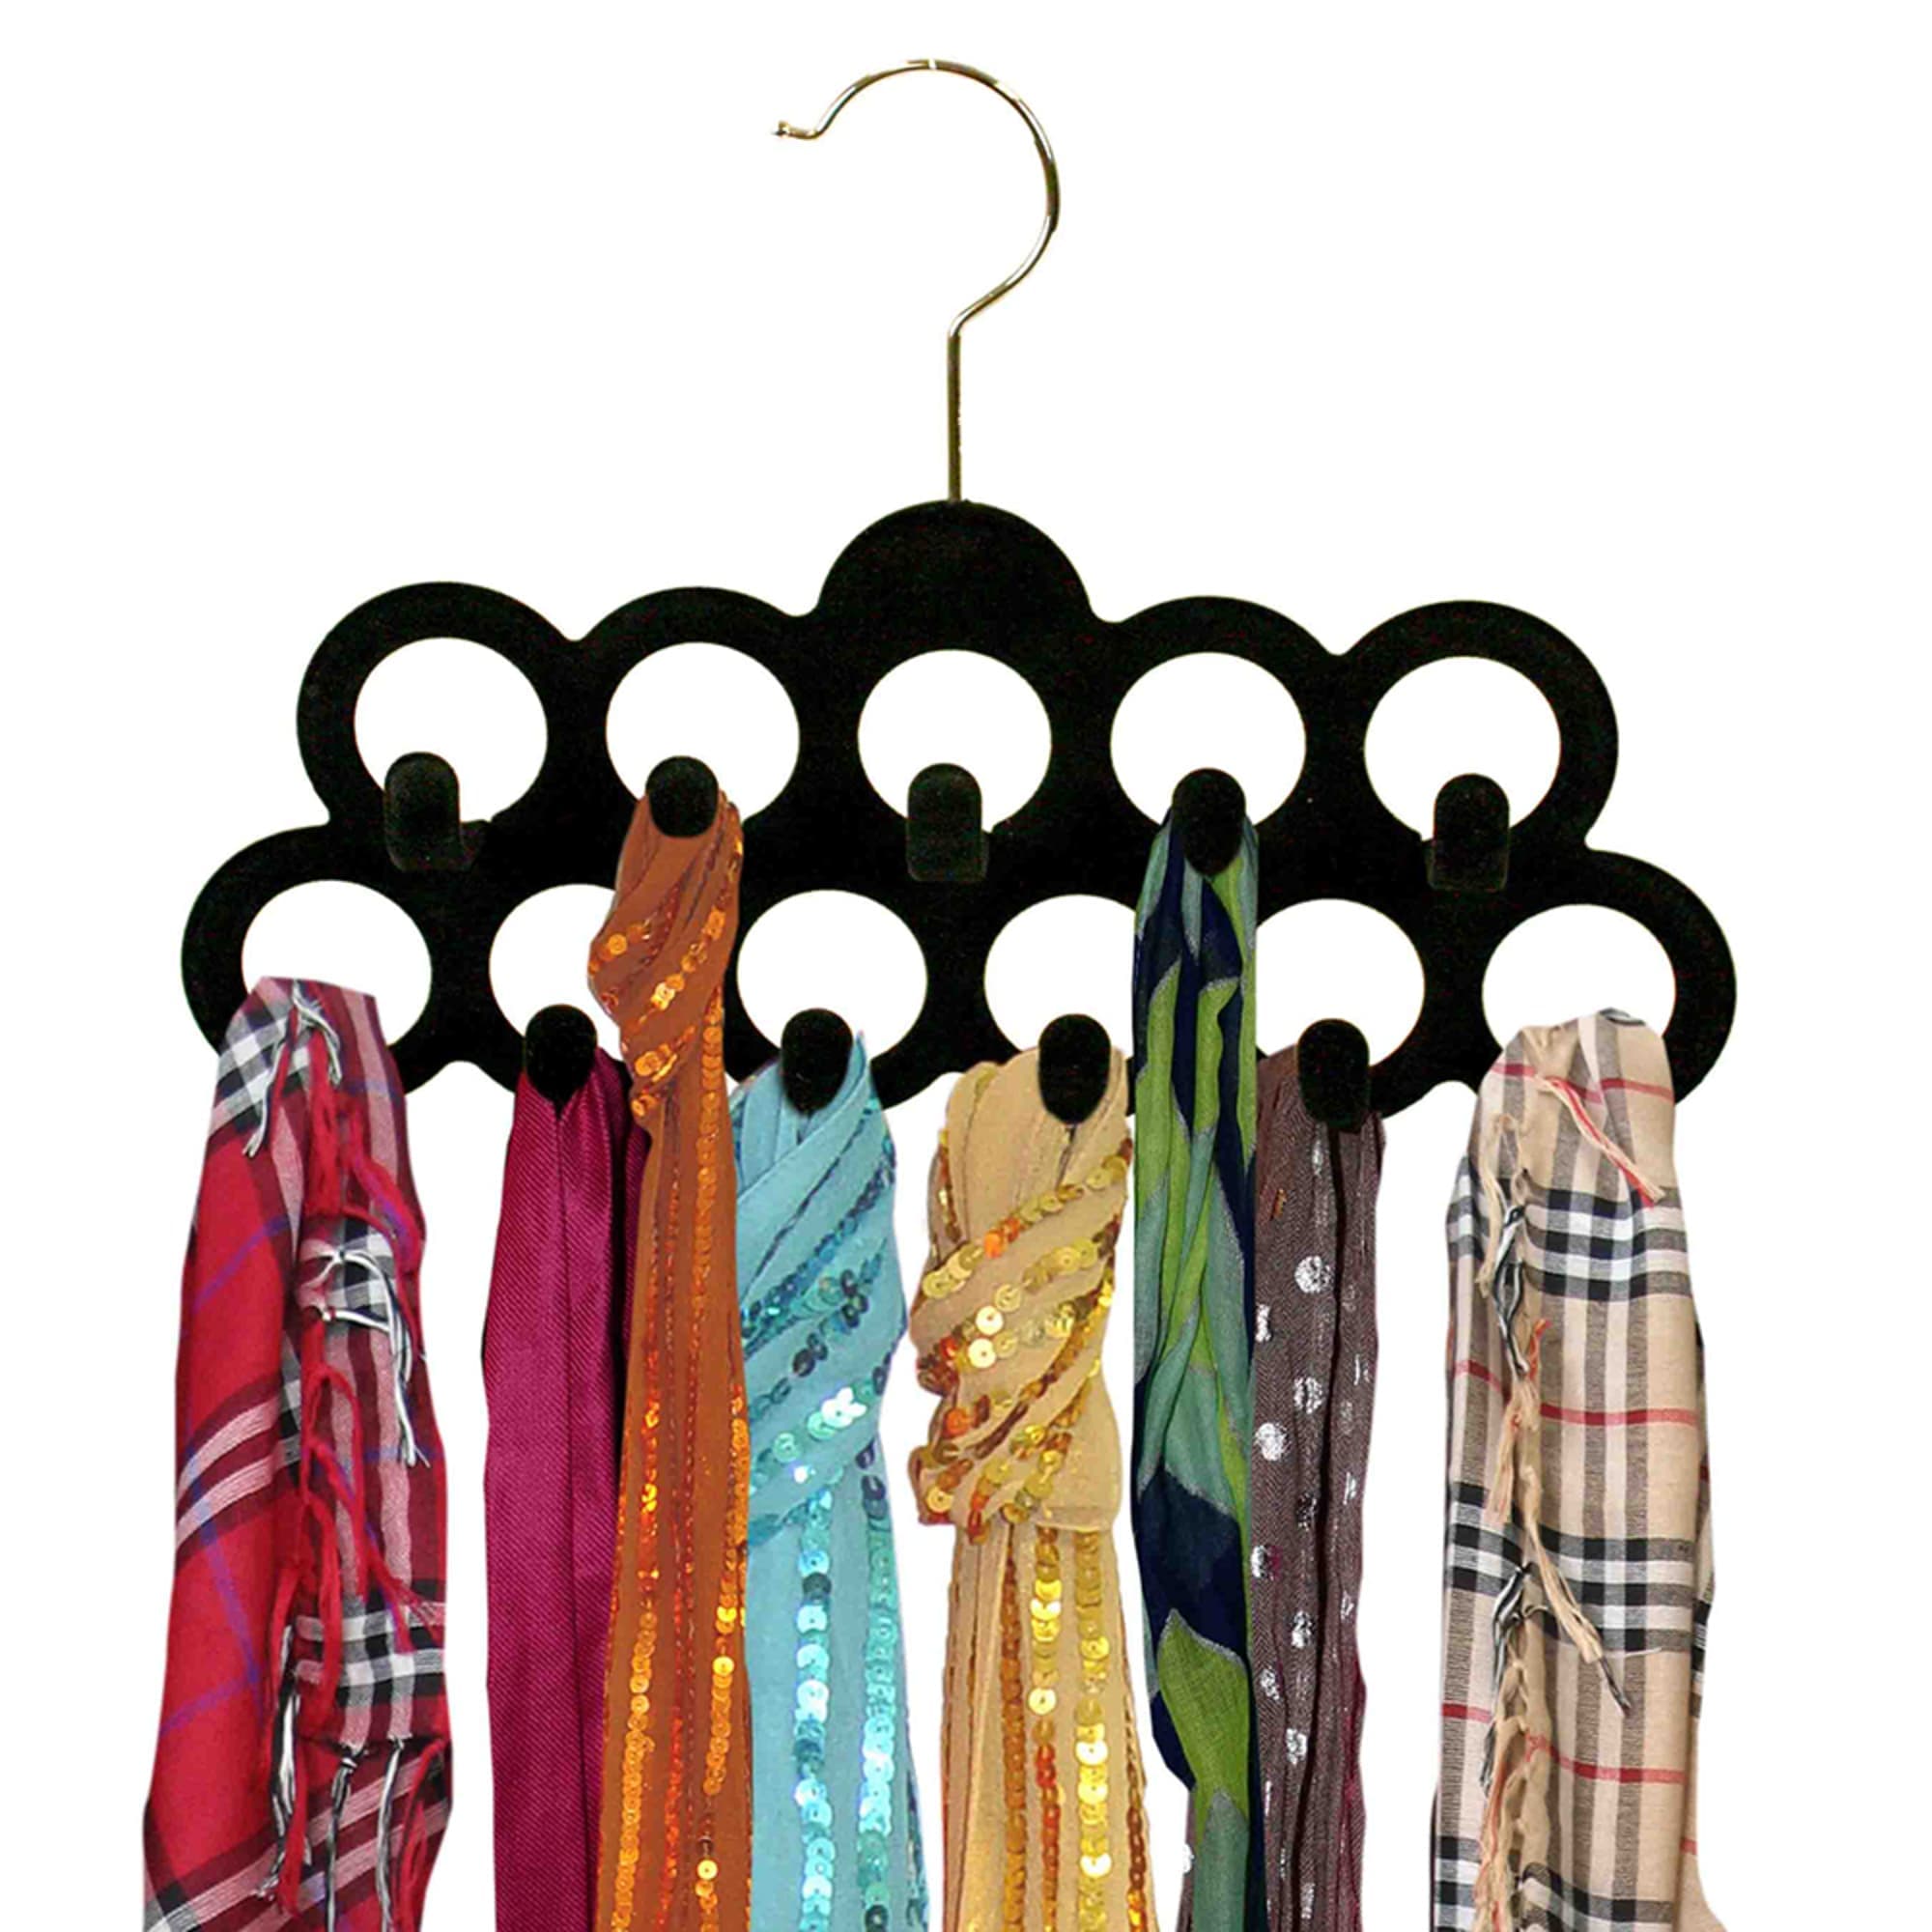 Black Velvet Scarf Hanger with Chrome Hook, 11-Hook Organizer for Scarves, Belts, Jewelry and Accessories $3.00 EACH, CASE PACK OF 24